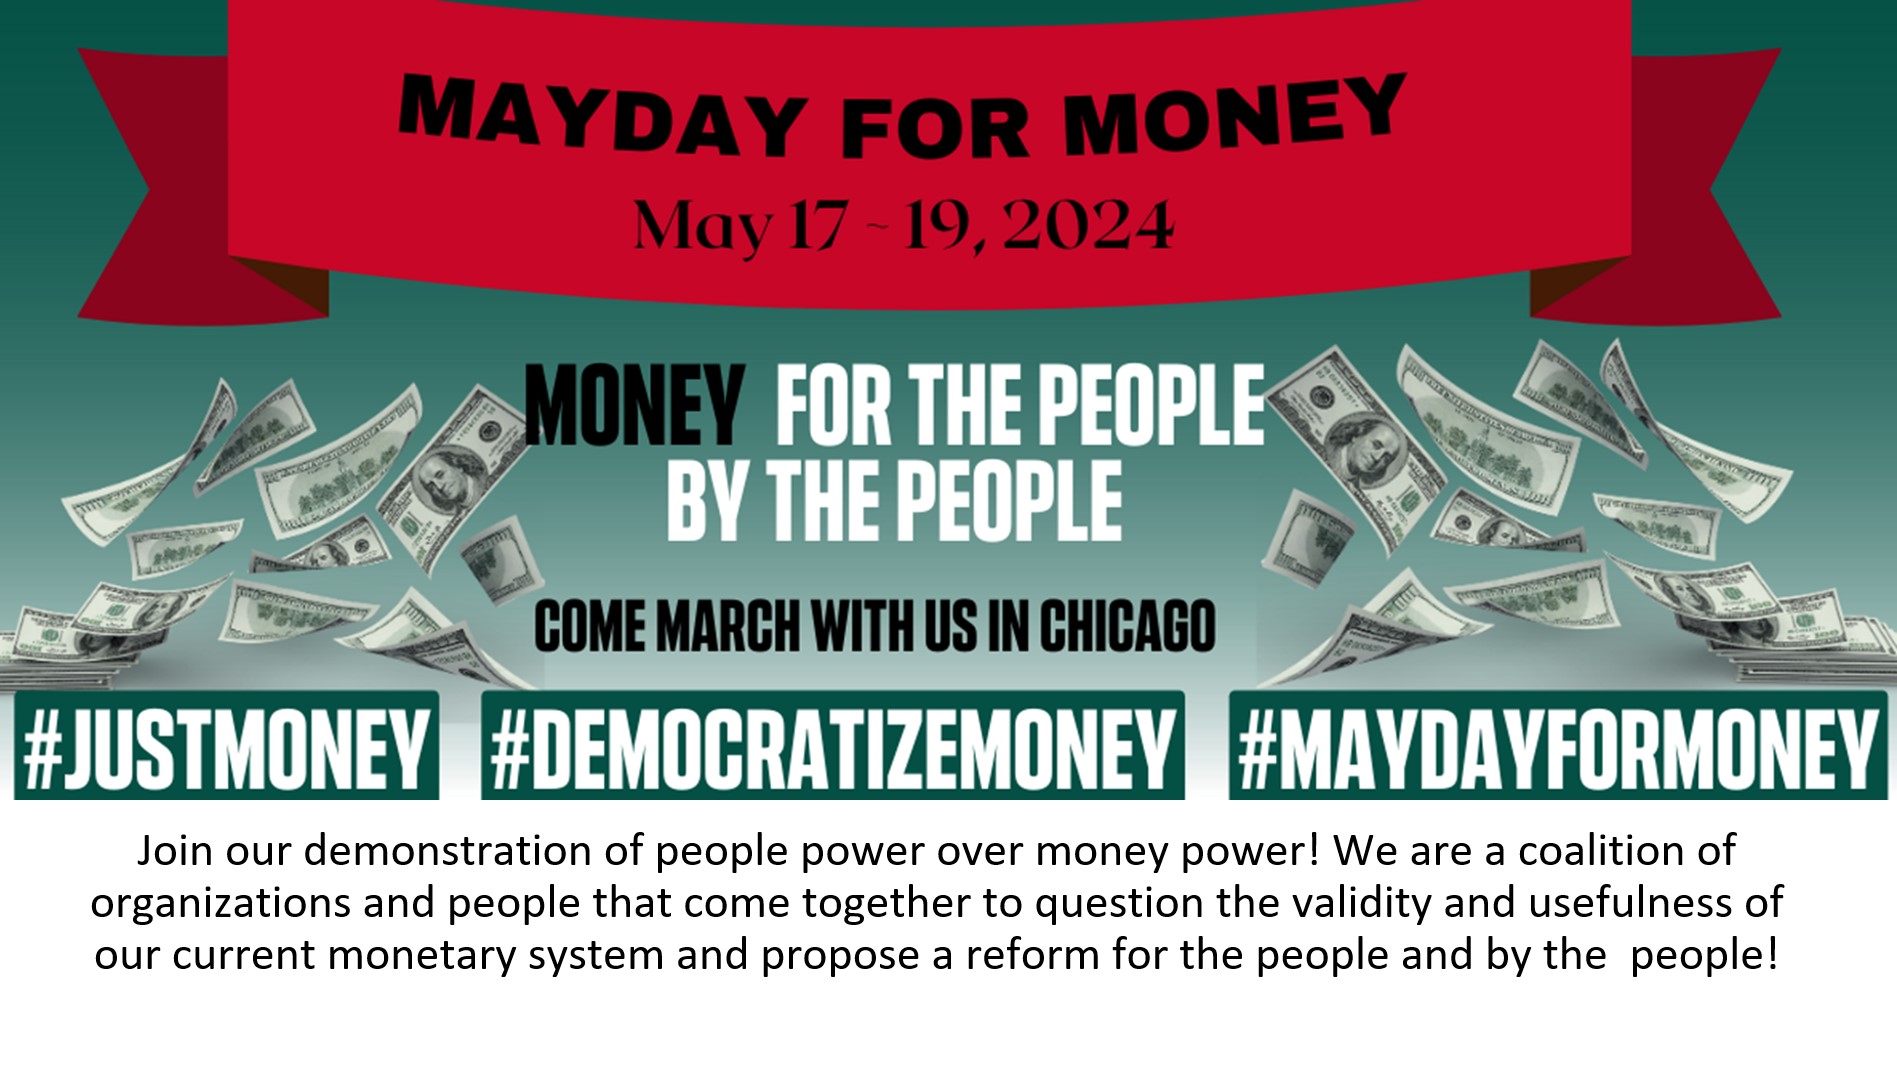 Banner for May Day for Just Money Demonstration — Chicago, Ill. May 17-19, 2024